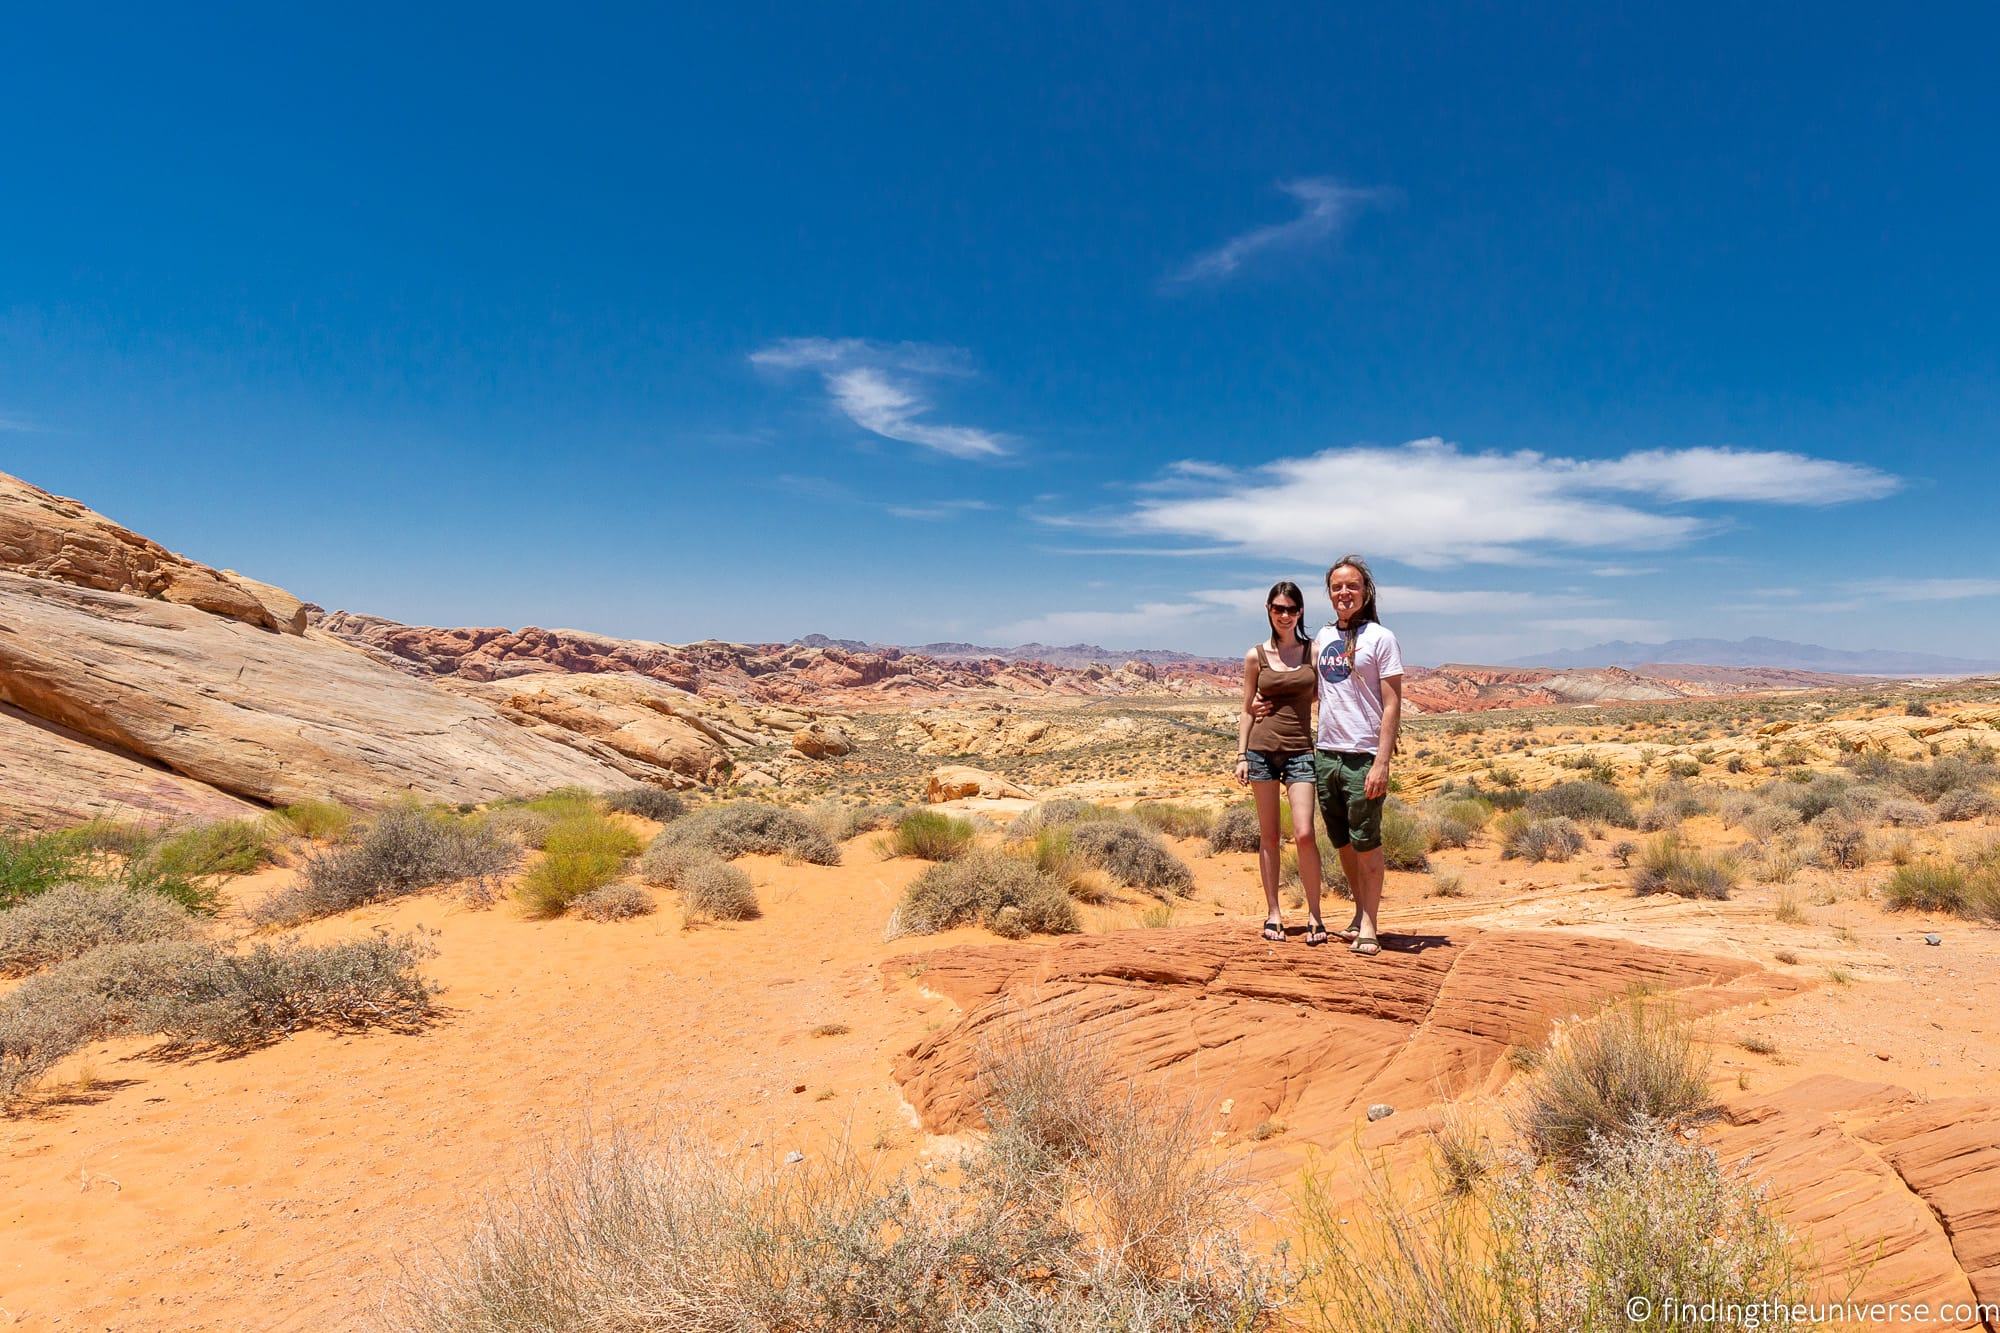 Laurence and Jess at Valley of Fire State Park